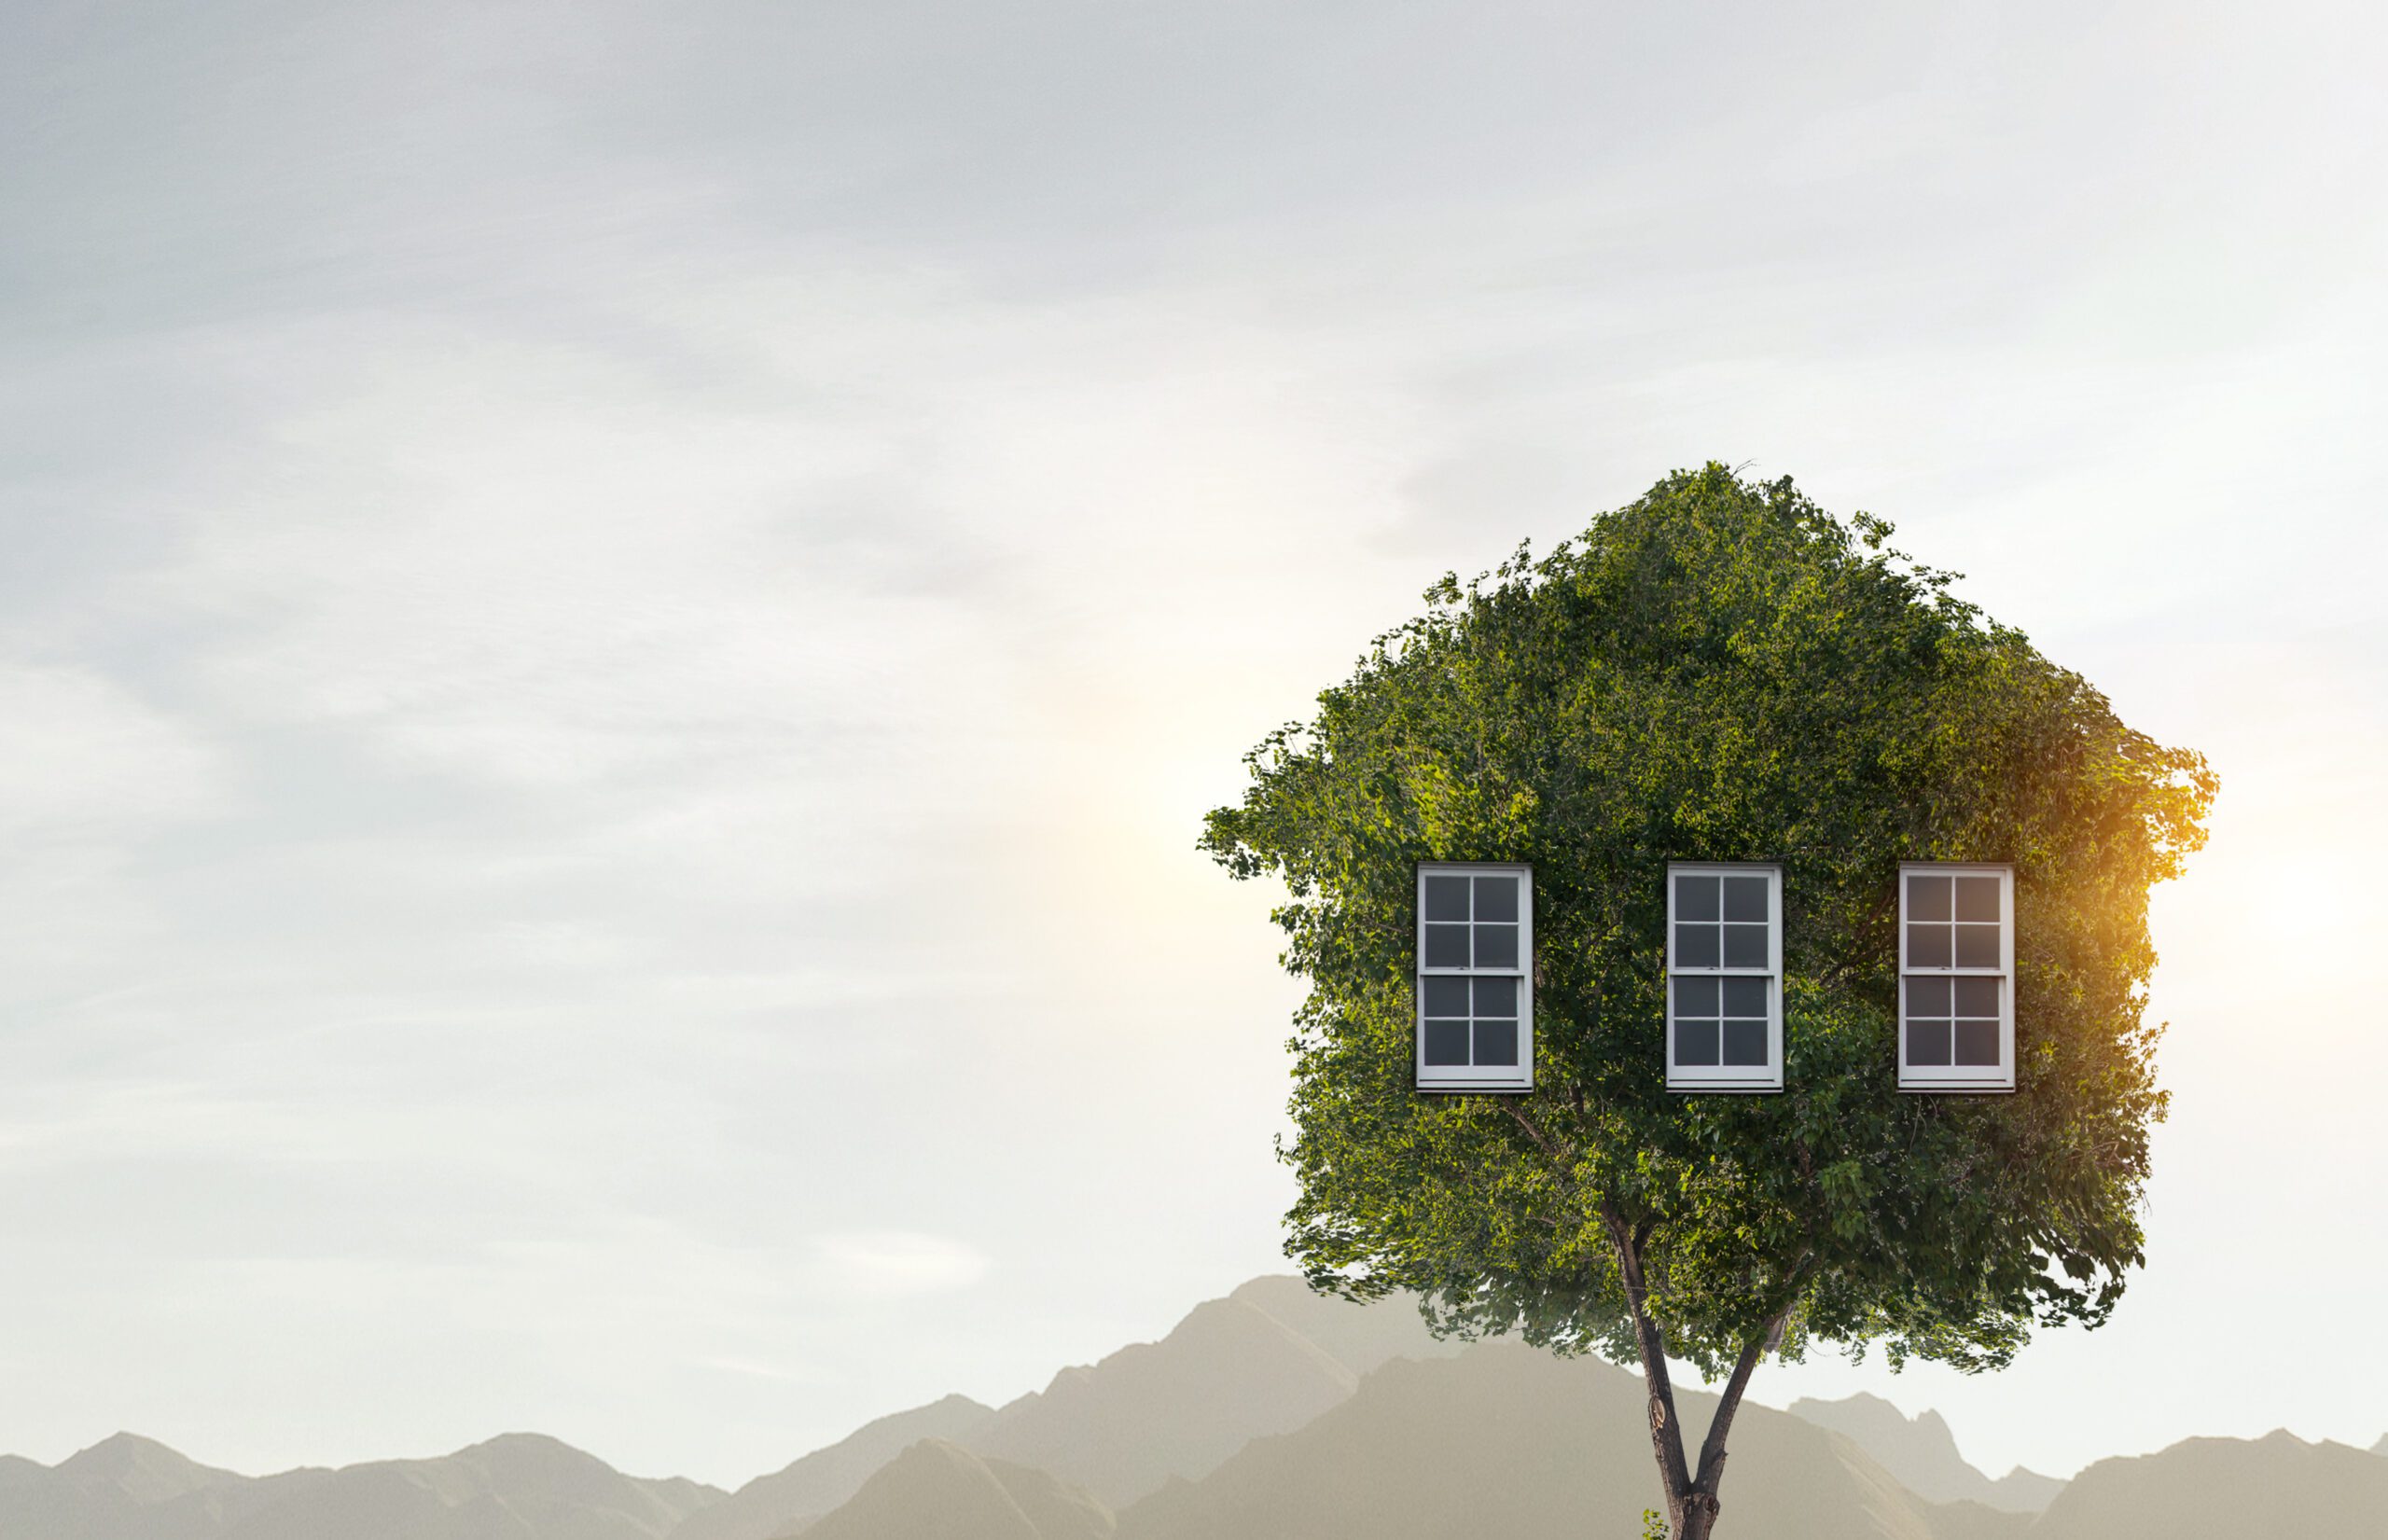 Achieving Greater Sustainability; Creating More of a Green Home